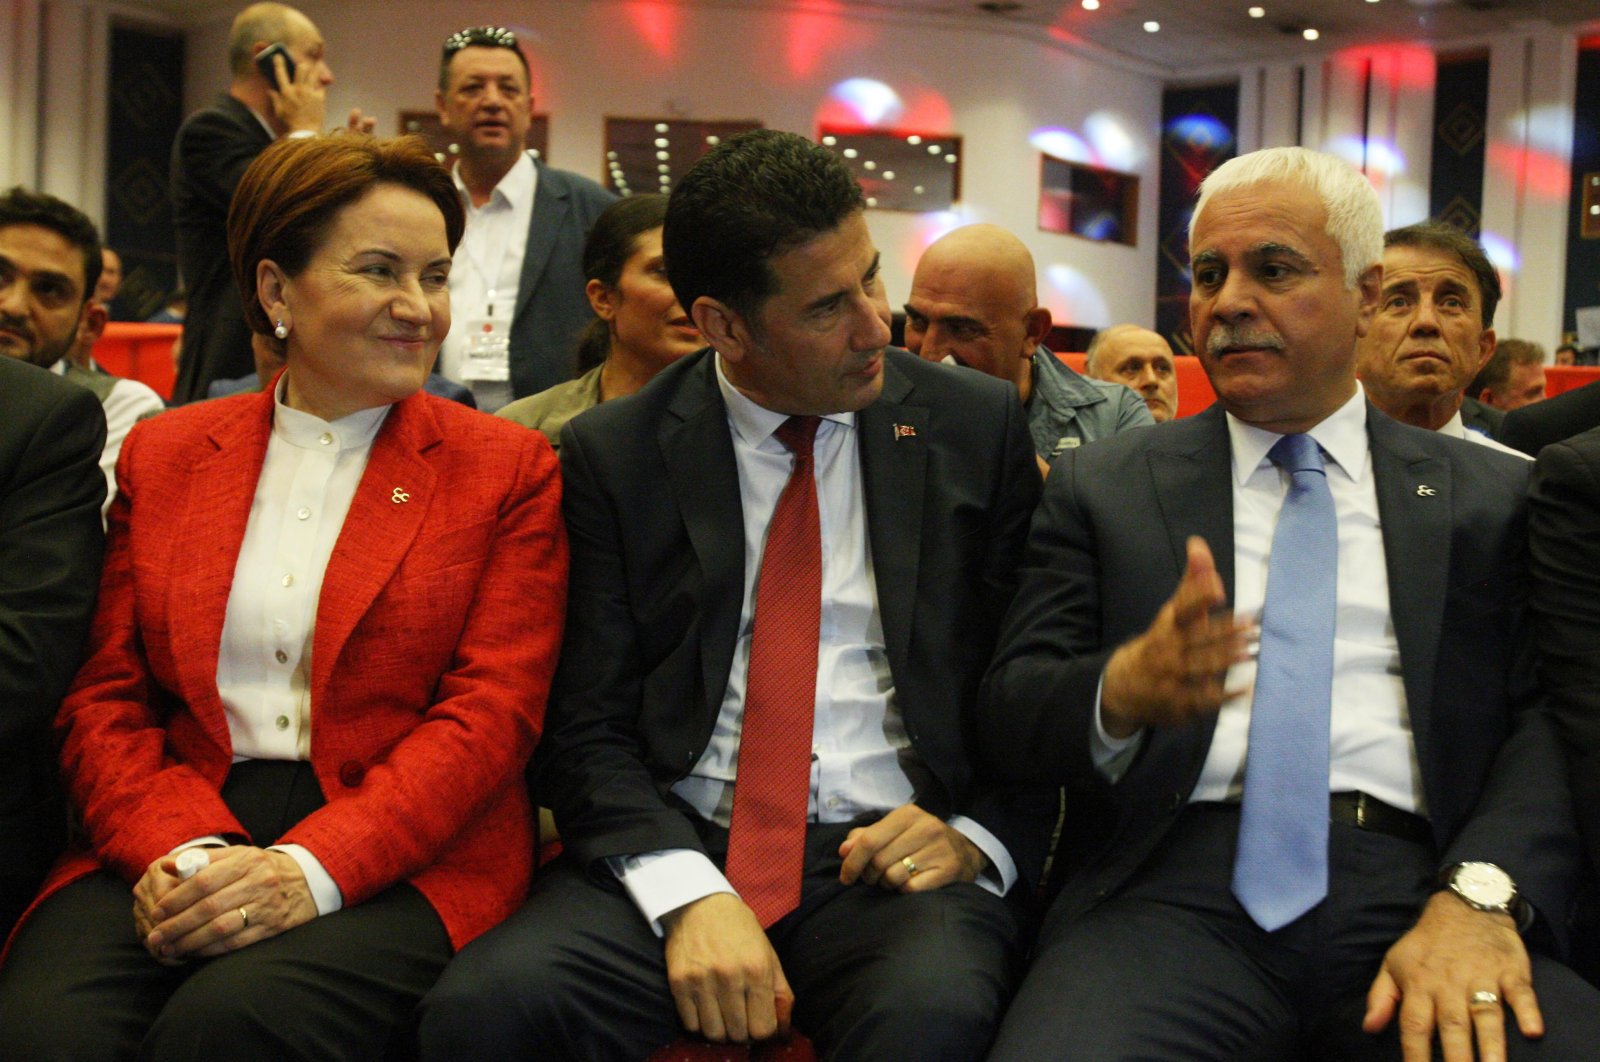 Koray Aydın (4th R) attends the Nationalist Movement Party’s (MHP) congress with for former Good Party (IP) Chair Meral Akşener (2nd L) and Sinan Oğan (C), in the capital Ankara, Türkiye, June 19, 2016. (Sabah File Photo)